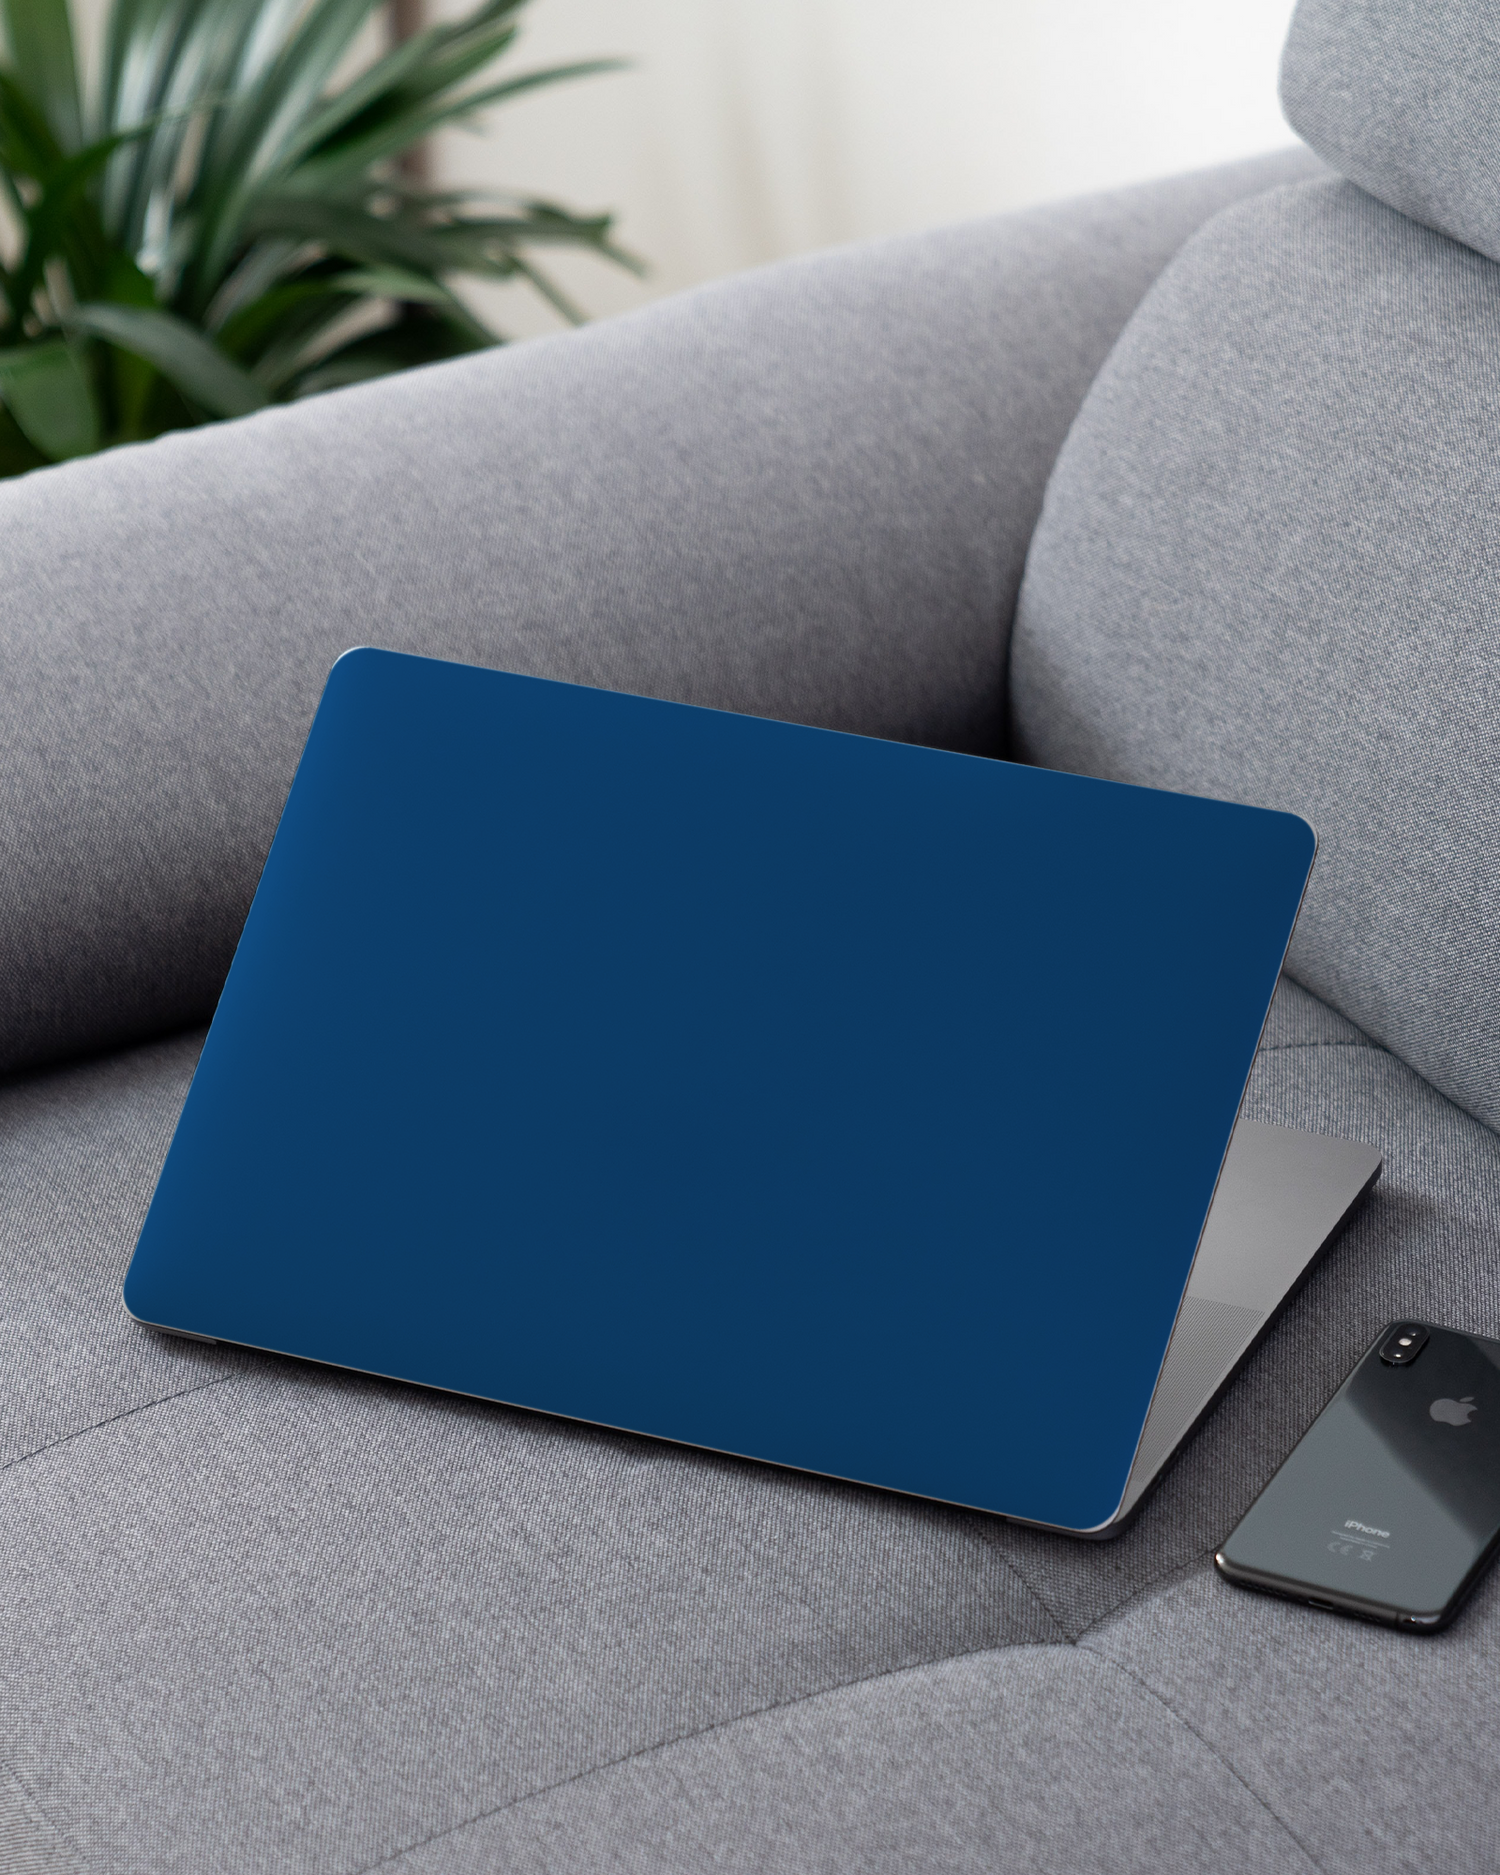 CLASSIC BLUE Laptop Skin for 13 inch Apple MacBooks on a couch